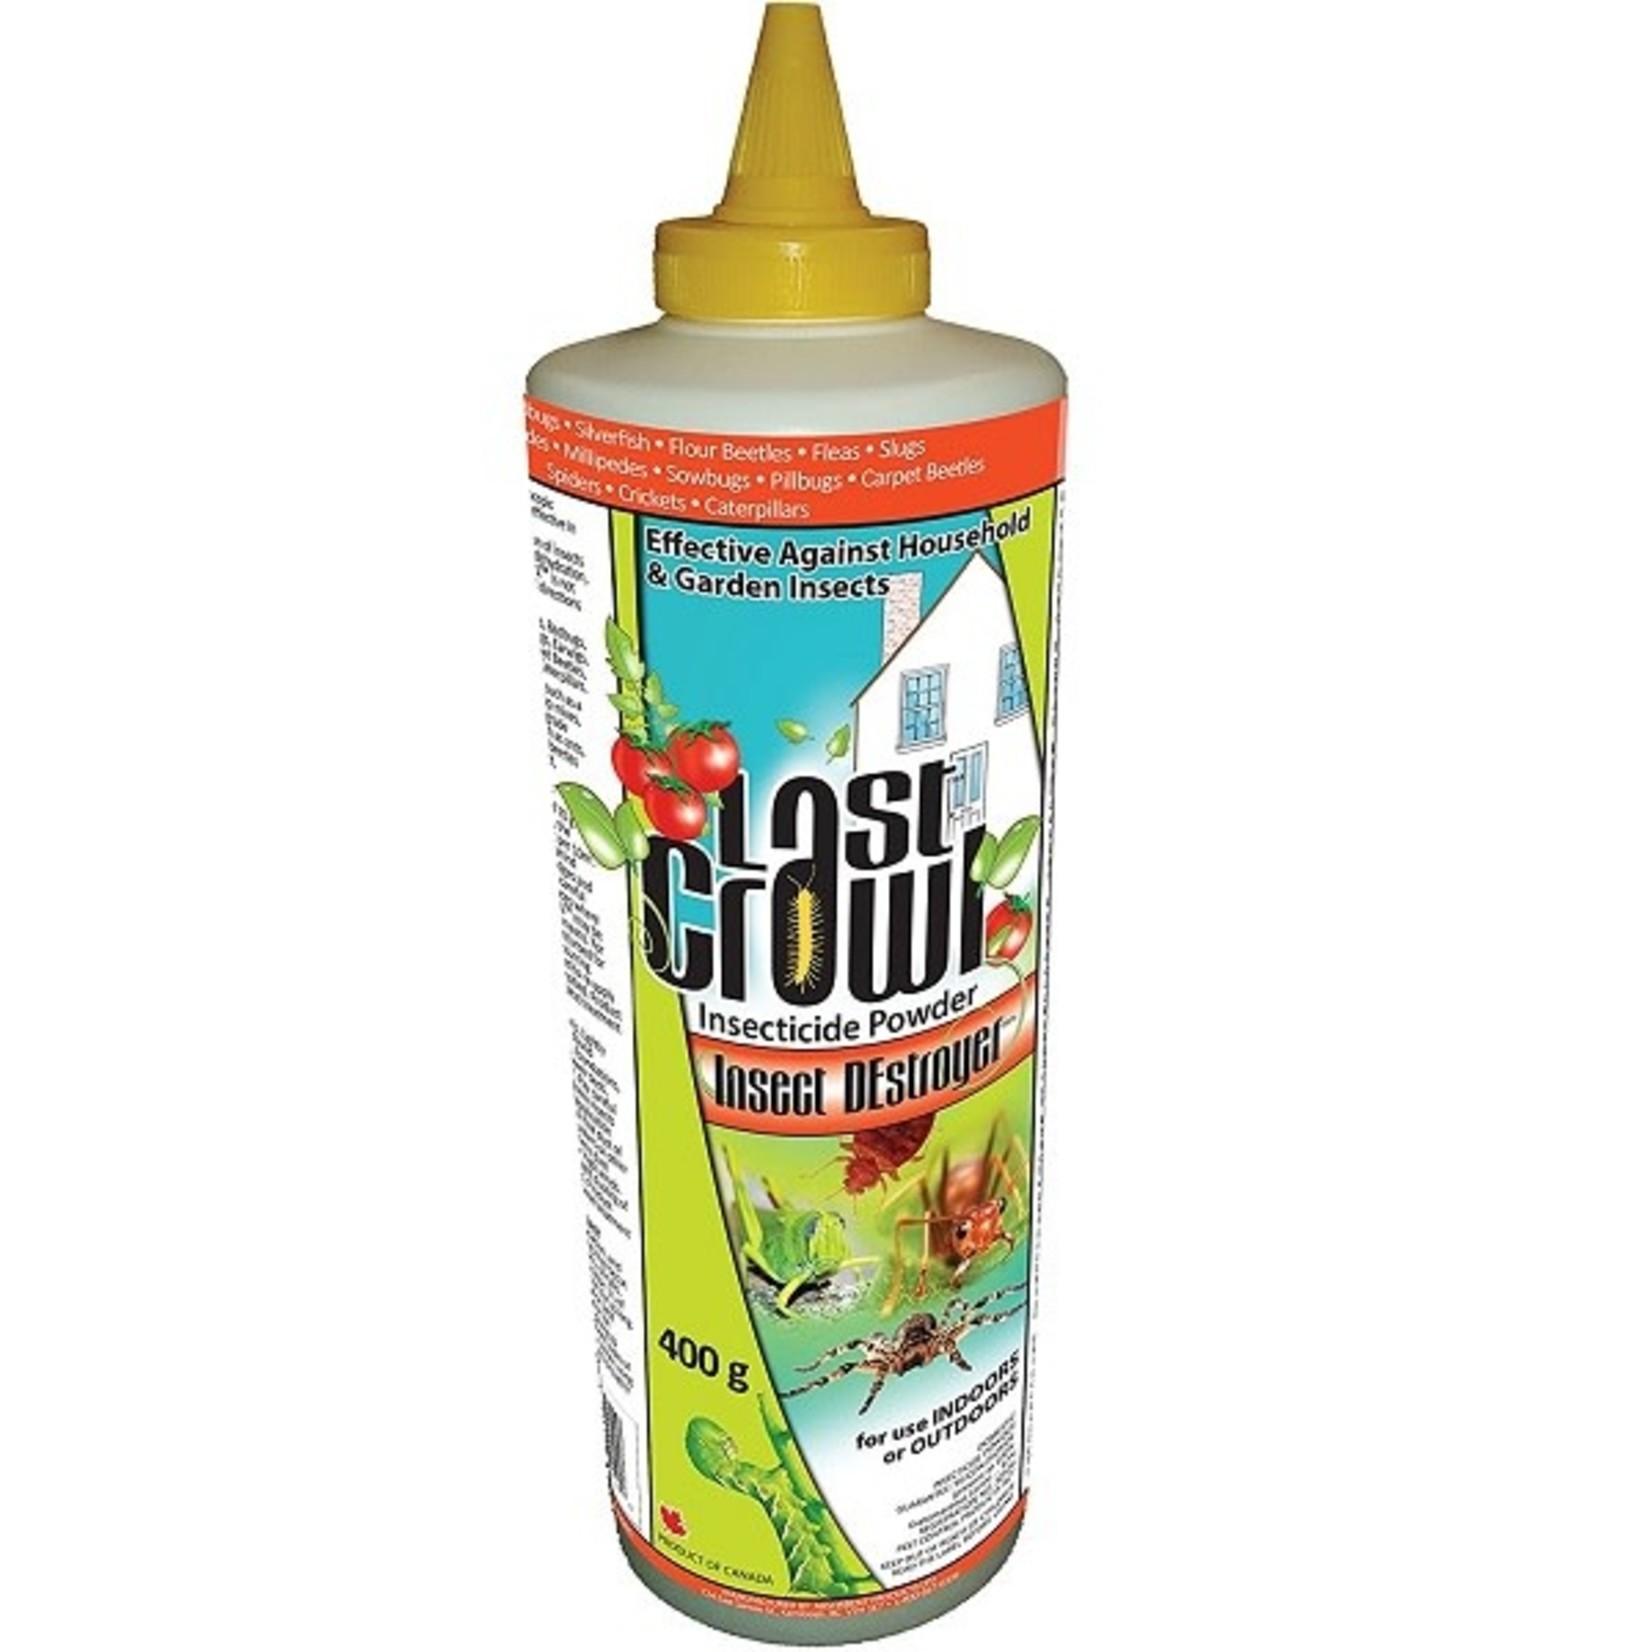 APL Last Crawl Non-toxic Insect Destroyer 400g